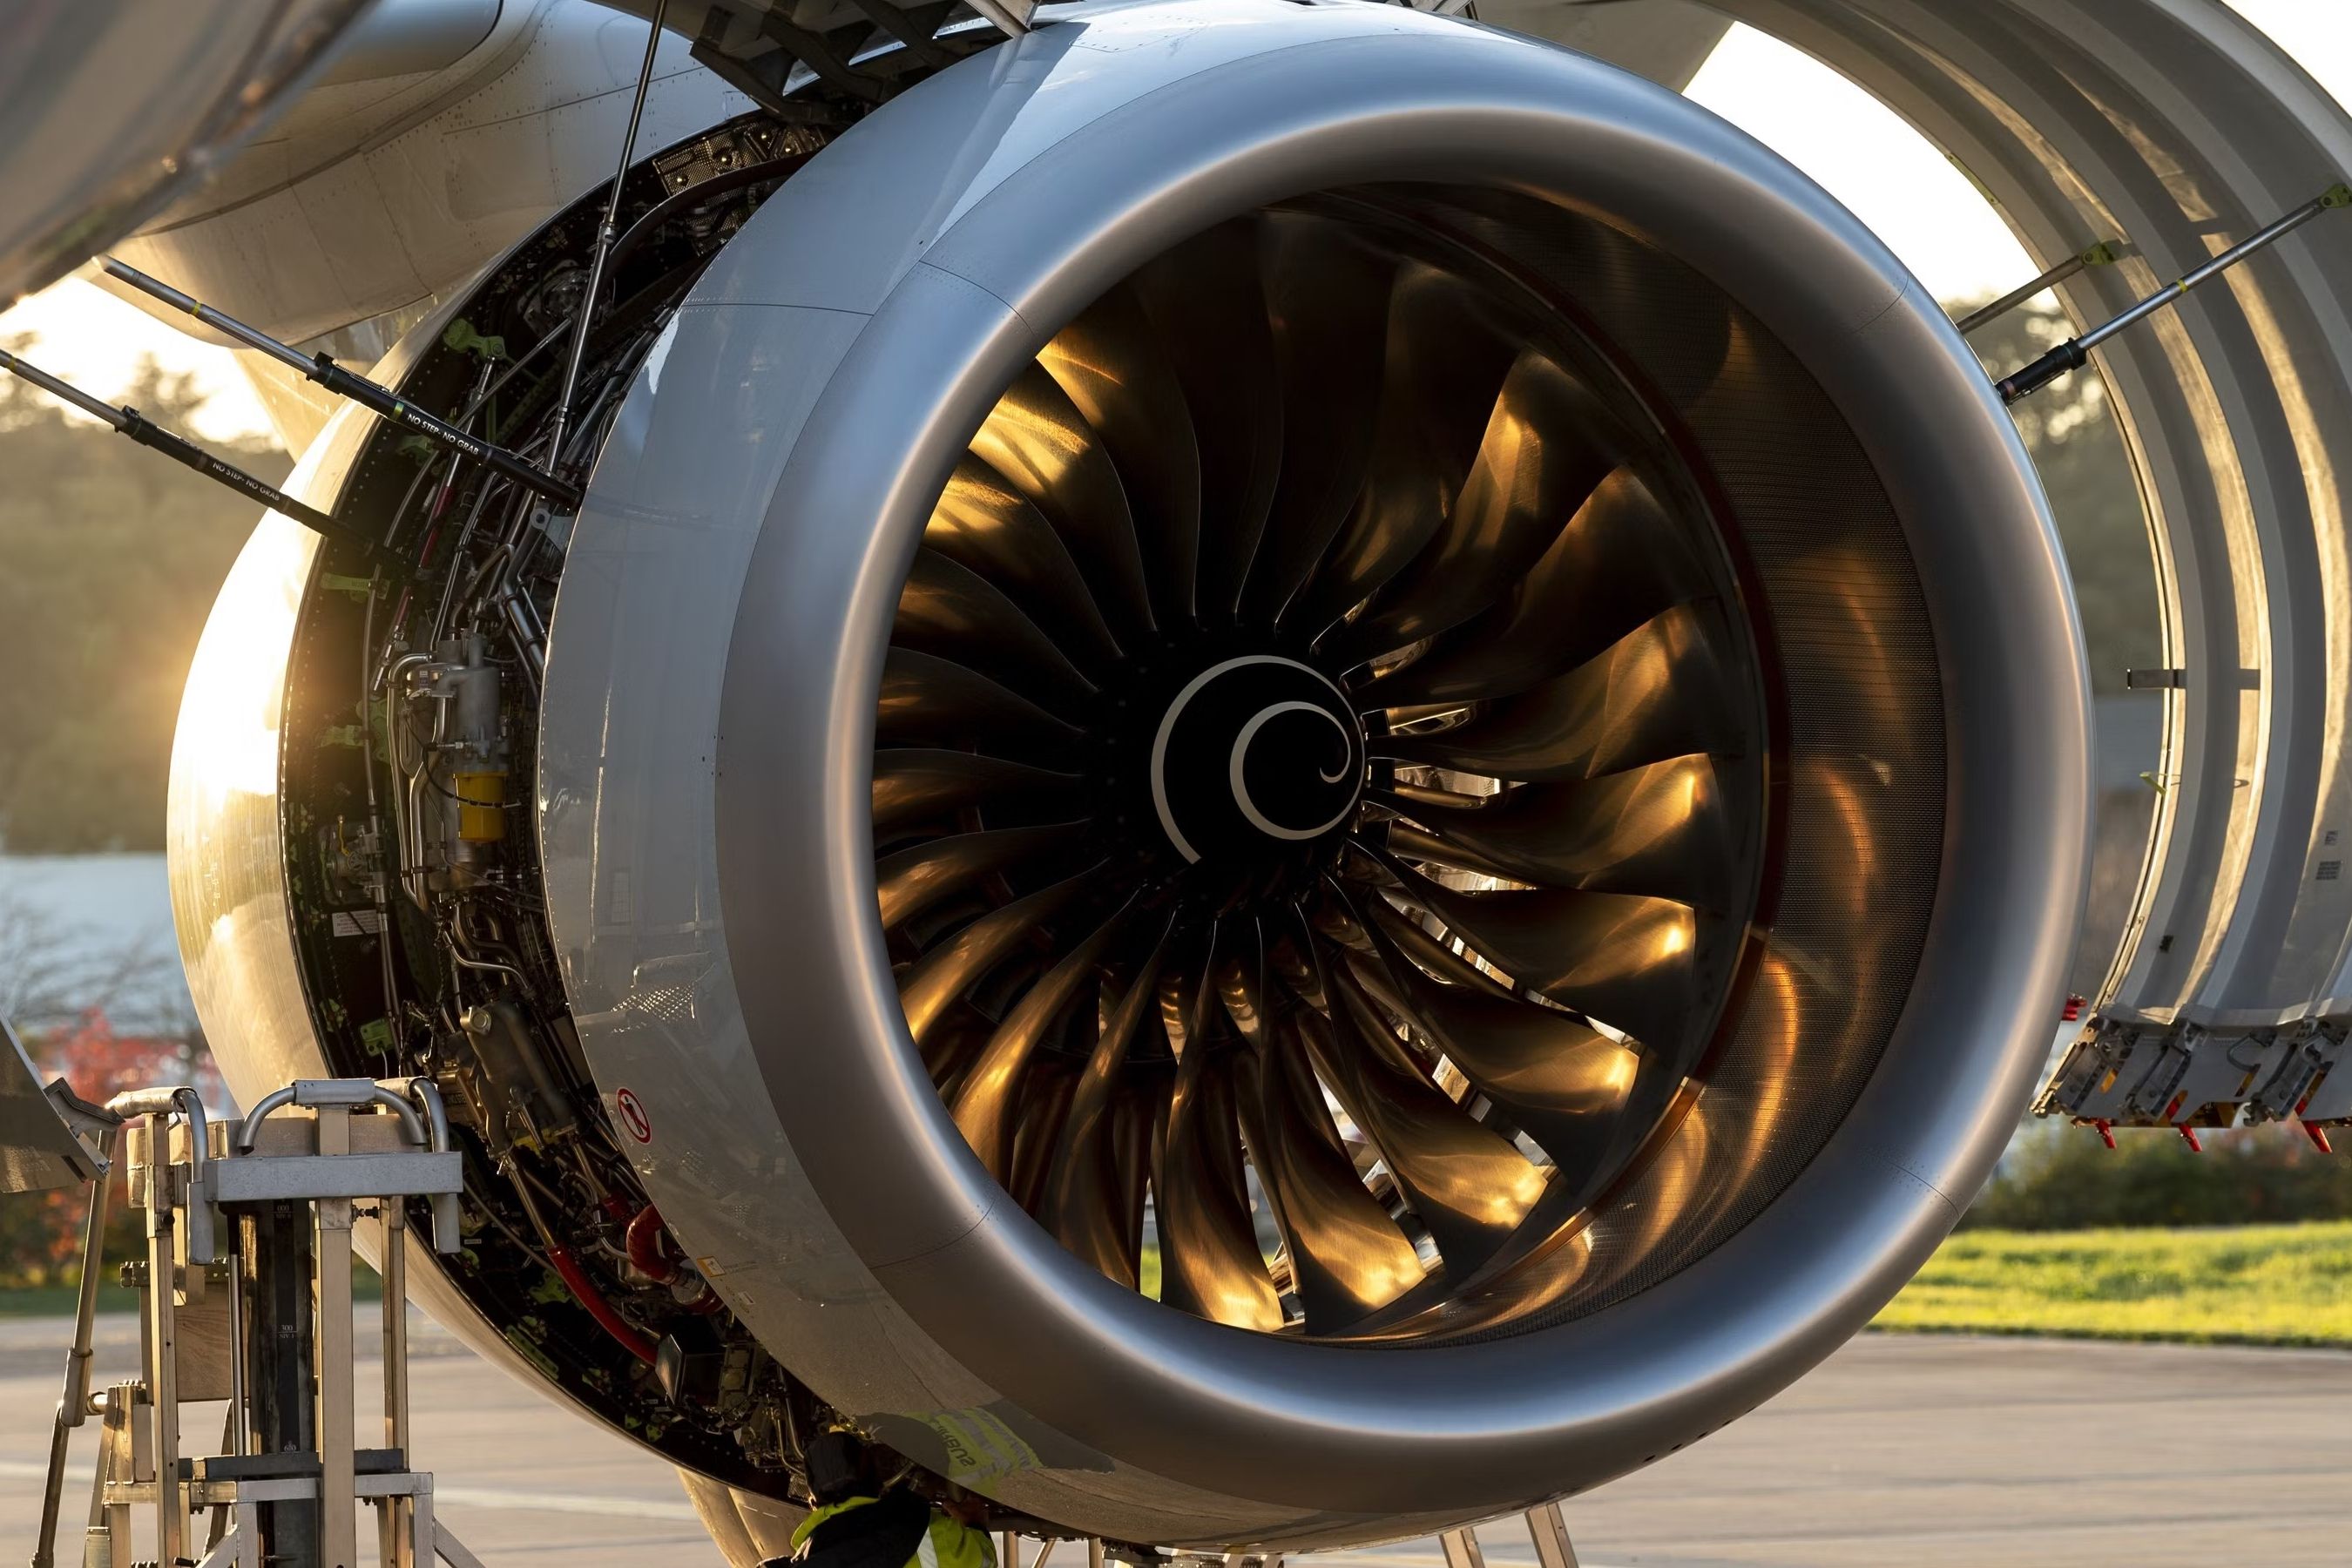 An Airbus A350-900 engine with its cowlings off.